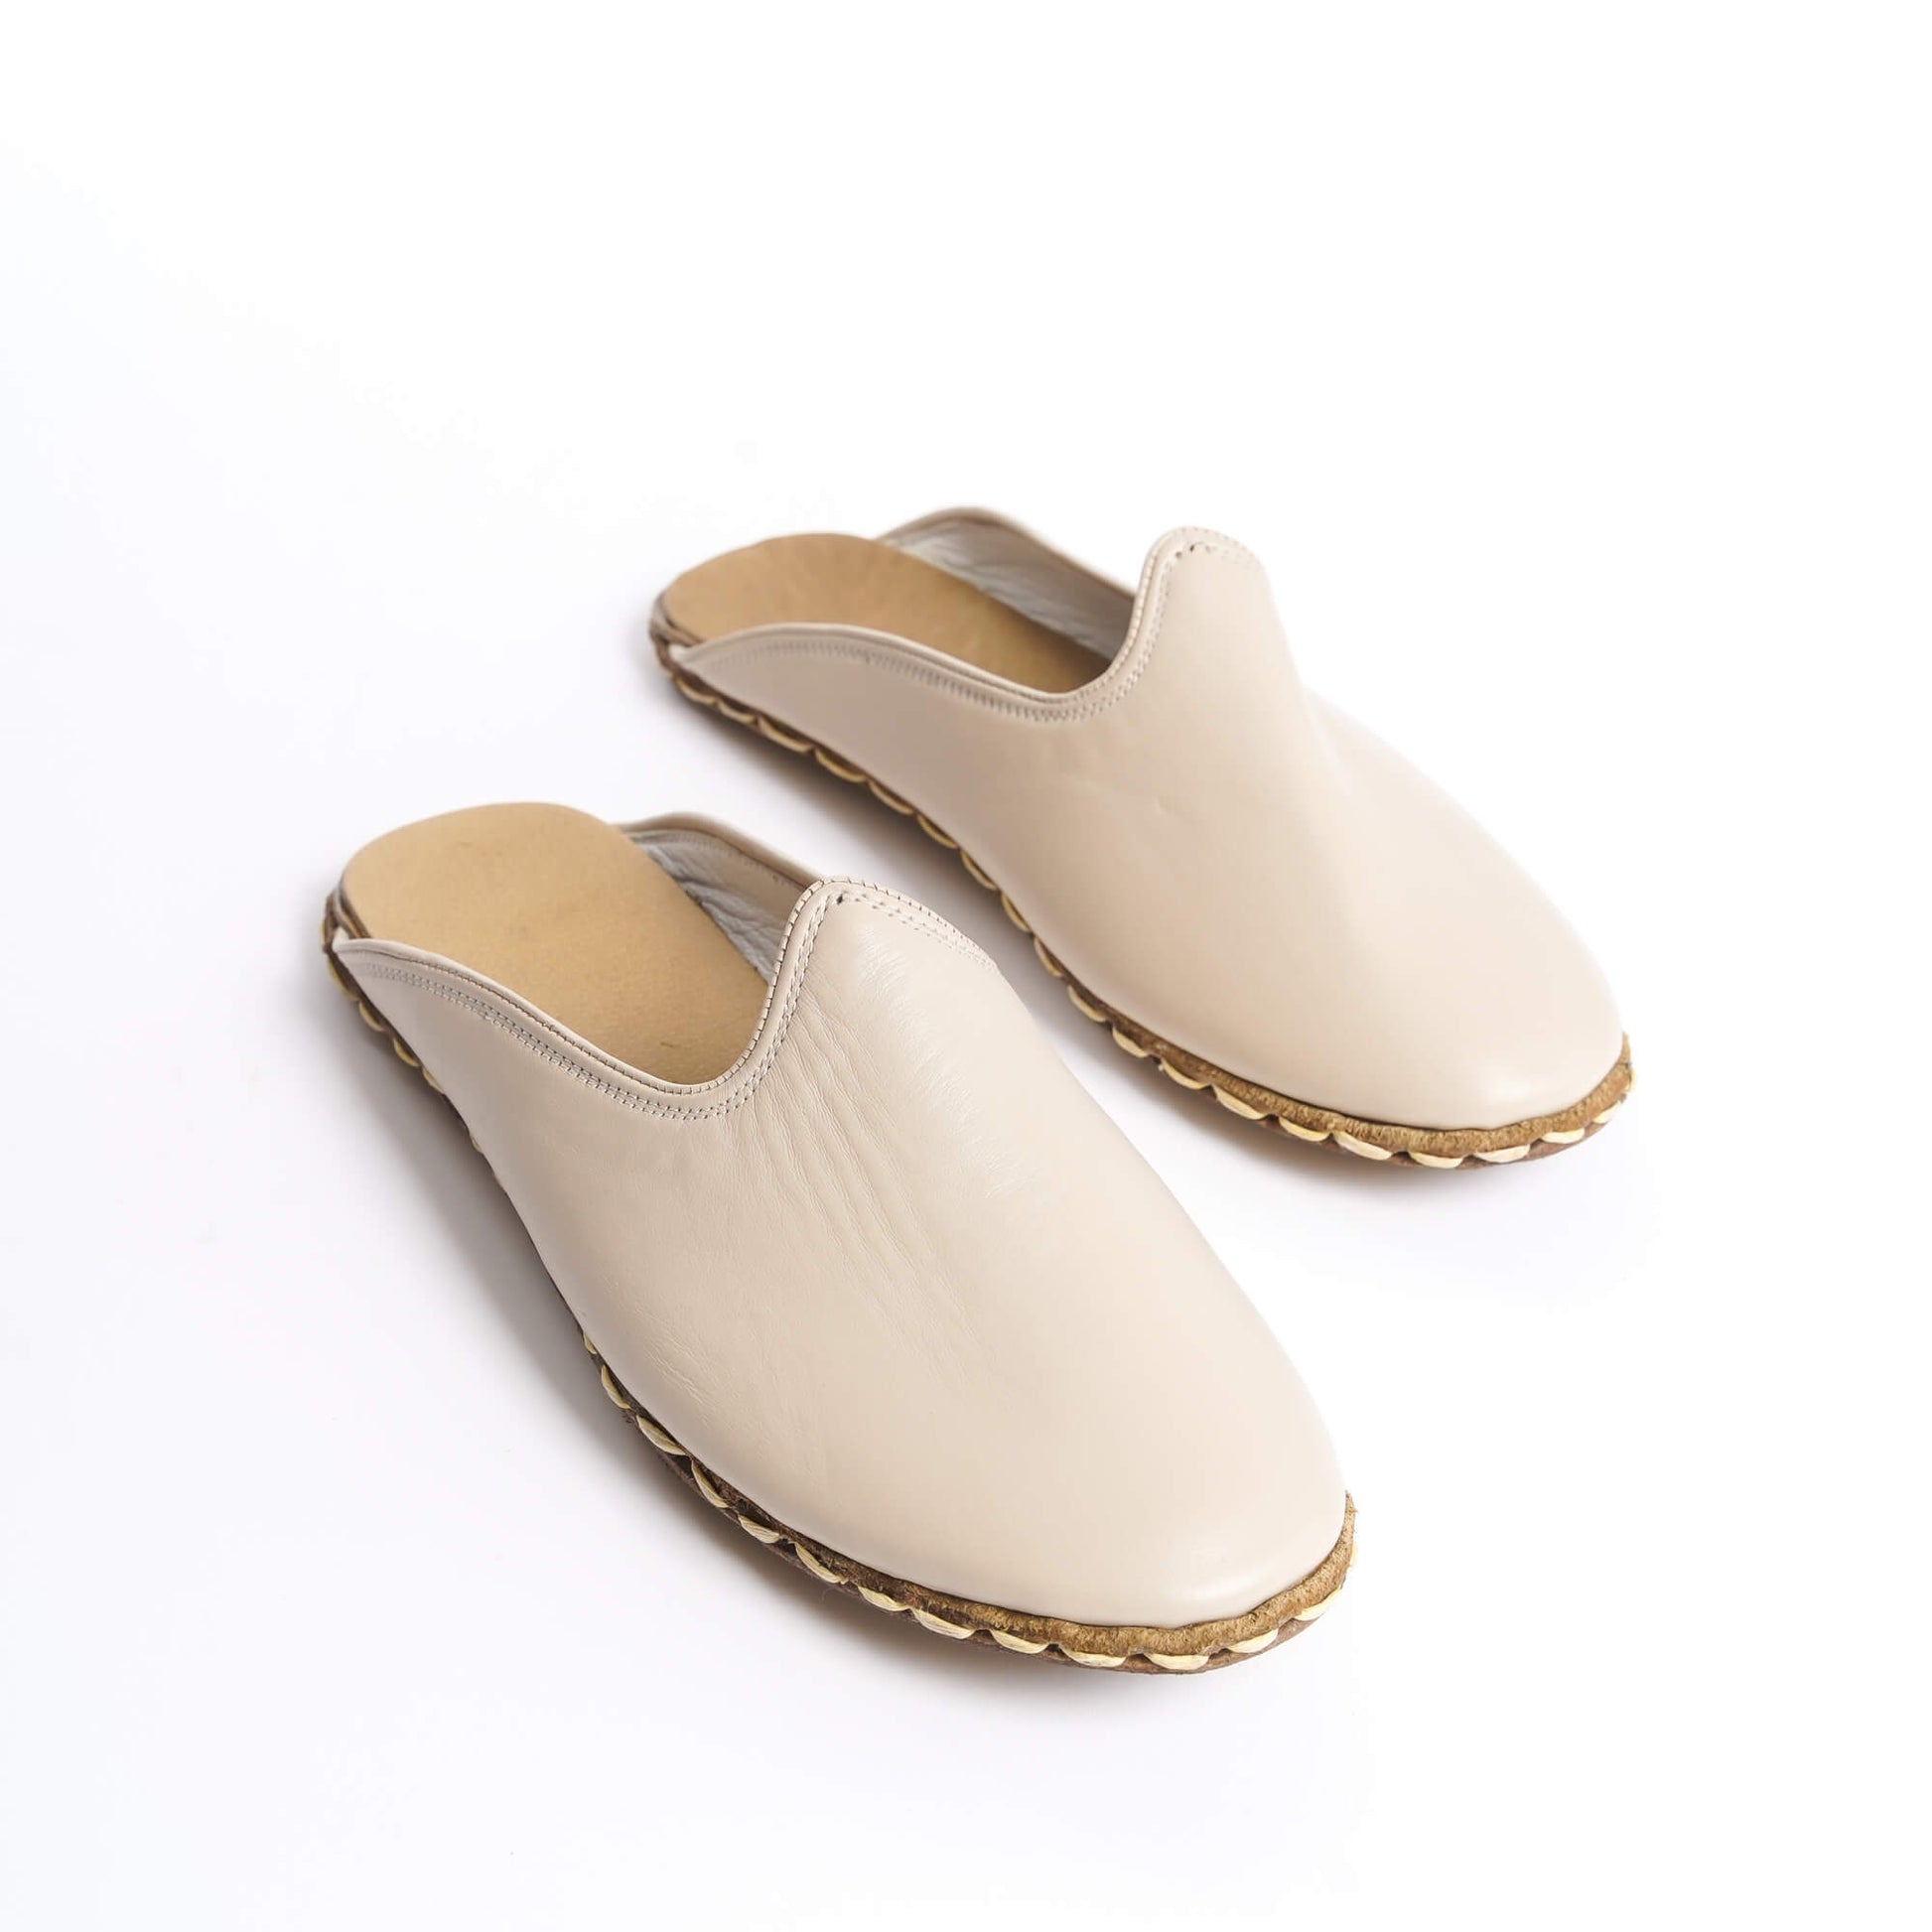 Elegant Beige Leather Mules – Minimalist Design for Women with Stitched Leather Sole